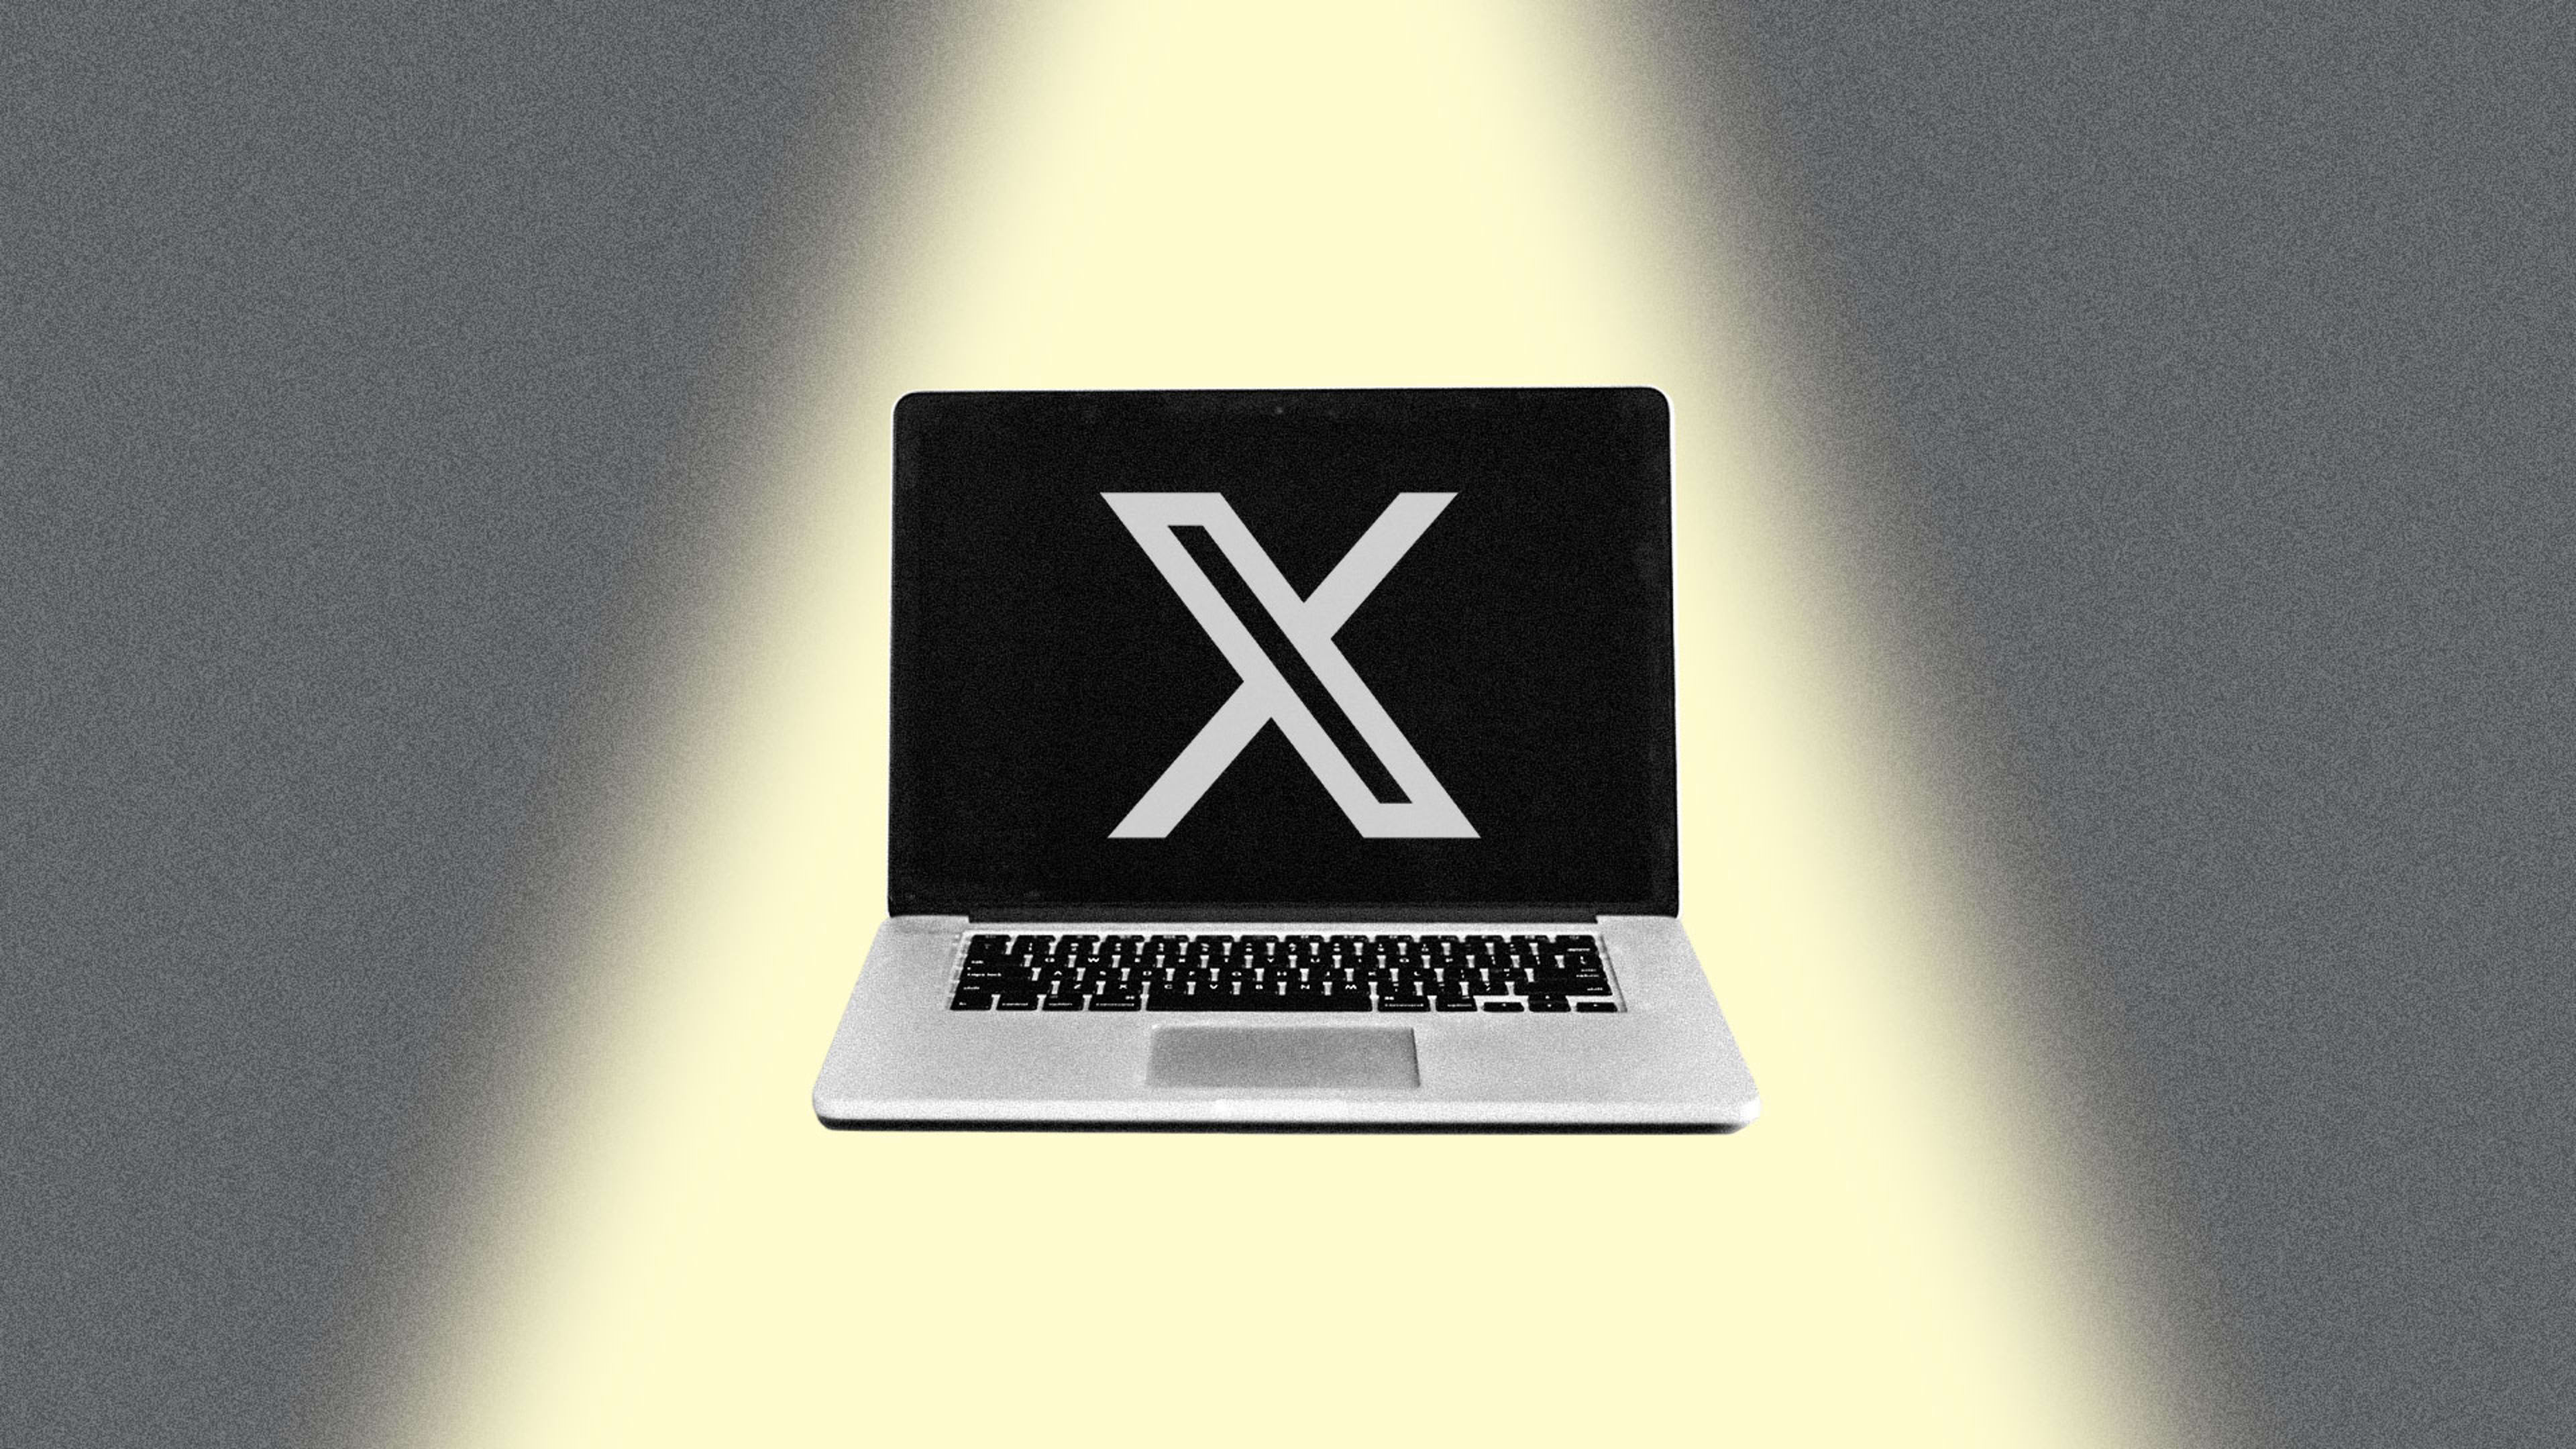 X’s new calling feature could open you up to scammers and stalkers